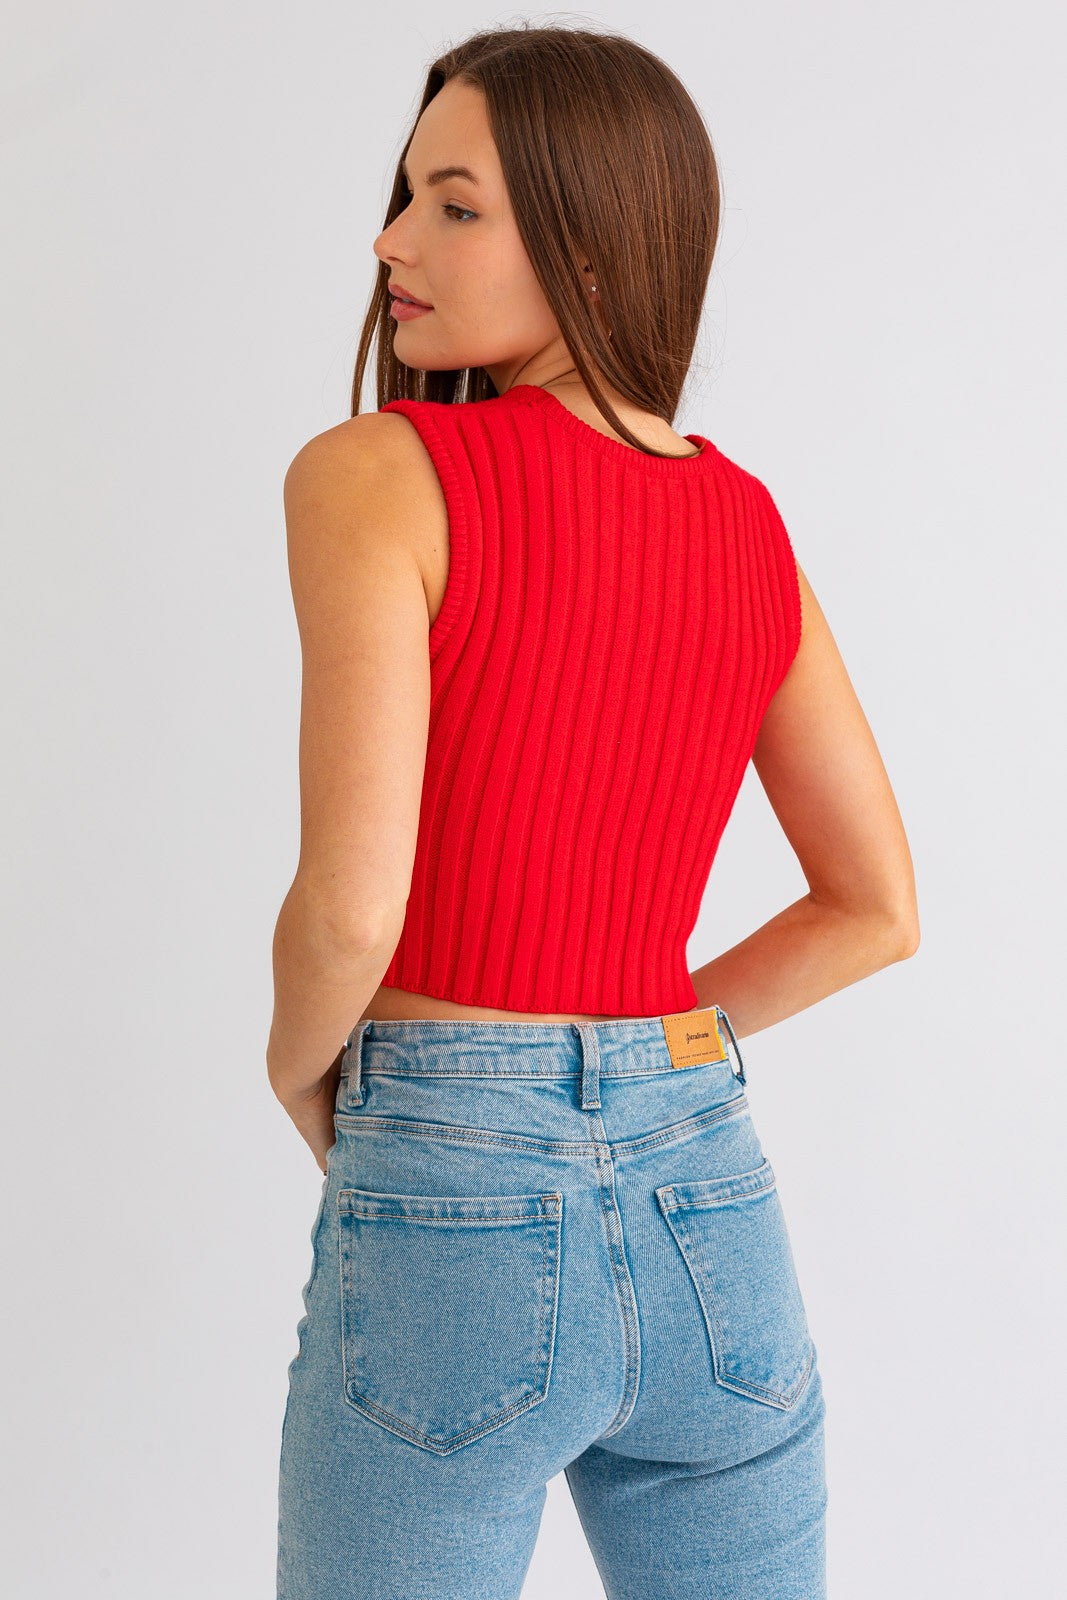 Radiant Red Ripple Top